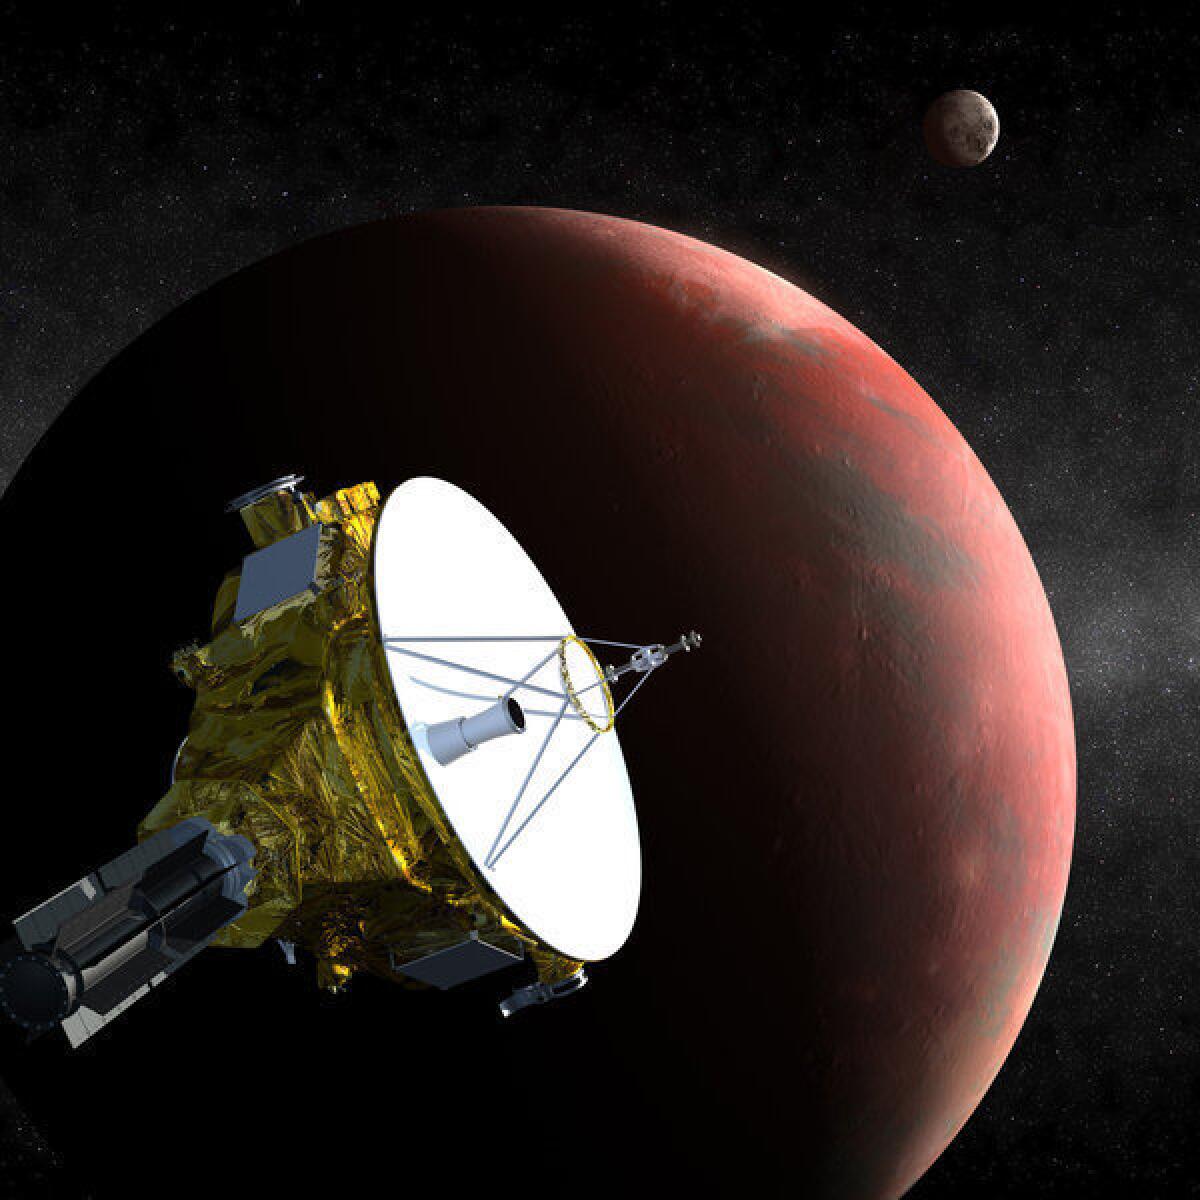 An artist's depiction of the New Horizons spacecraft approaching Pluto in July 2015. Moons and debris could damage the craft as it makes its journey, scientists said Tuesday.